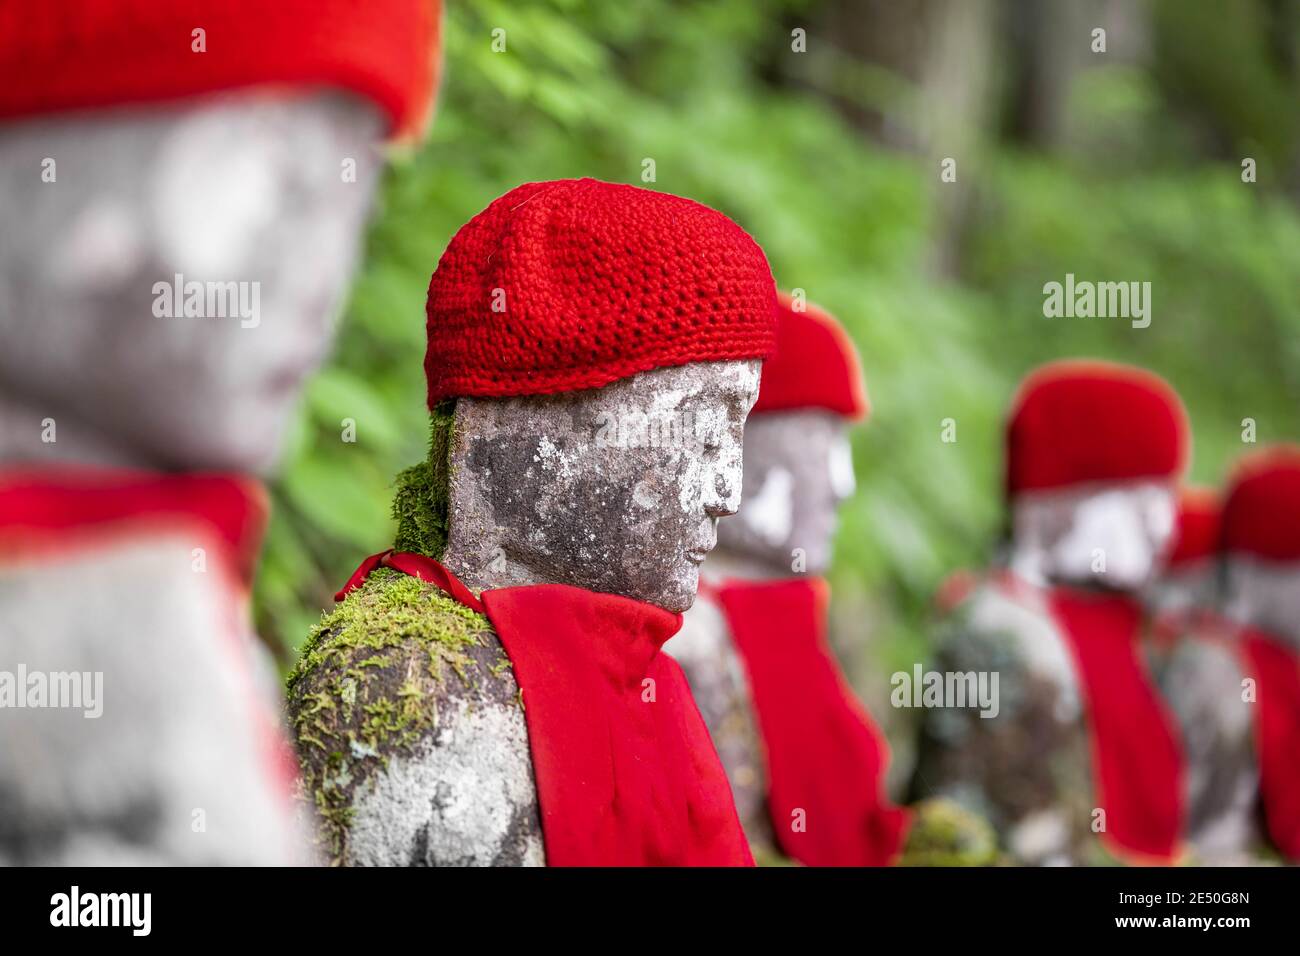 Close up of a row of stone japanese jizo statues wearing red caps and bibs, against a green bokeh background Stock Photo